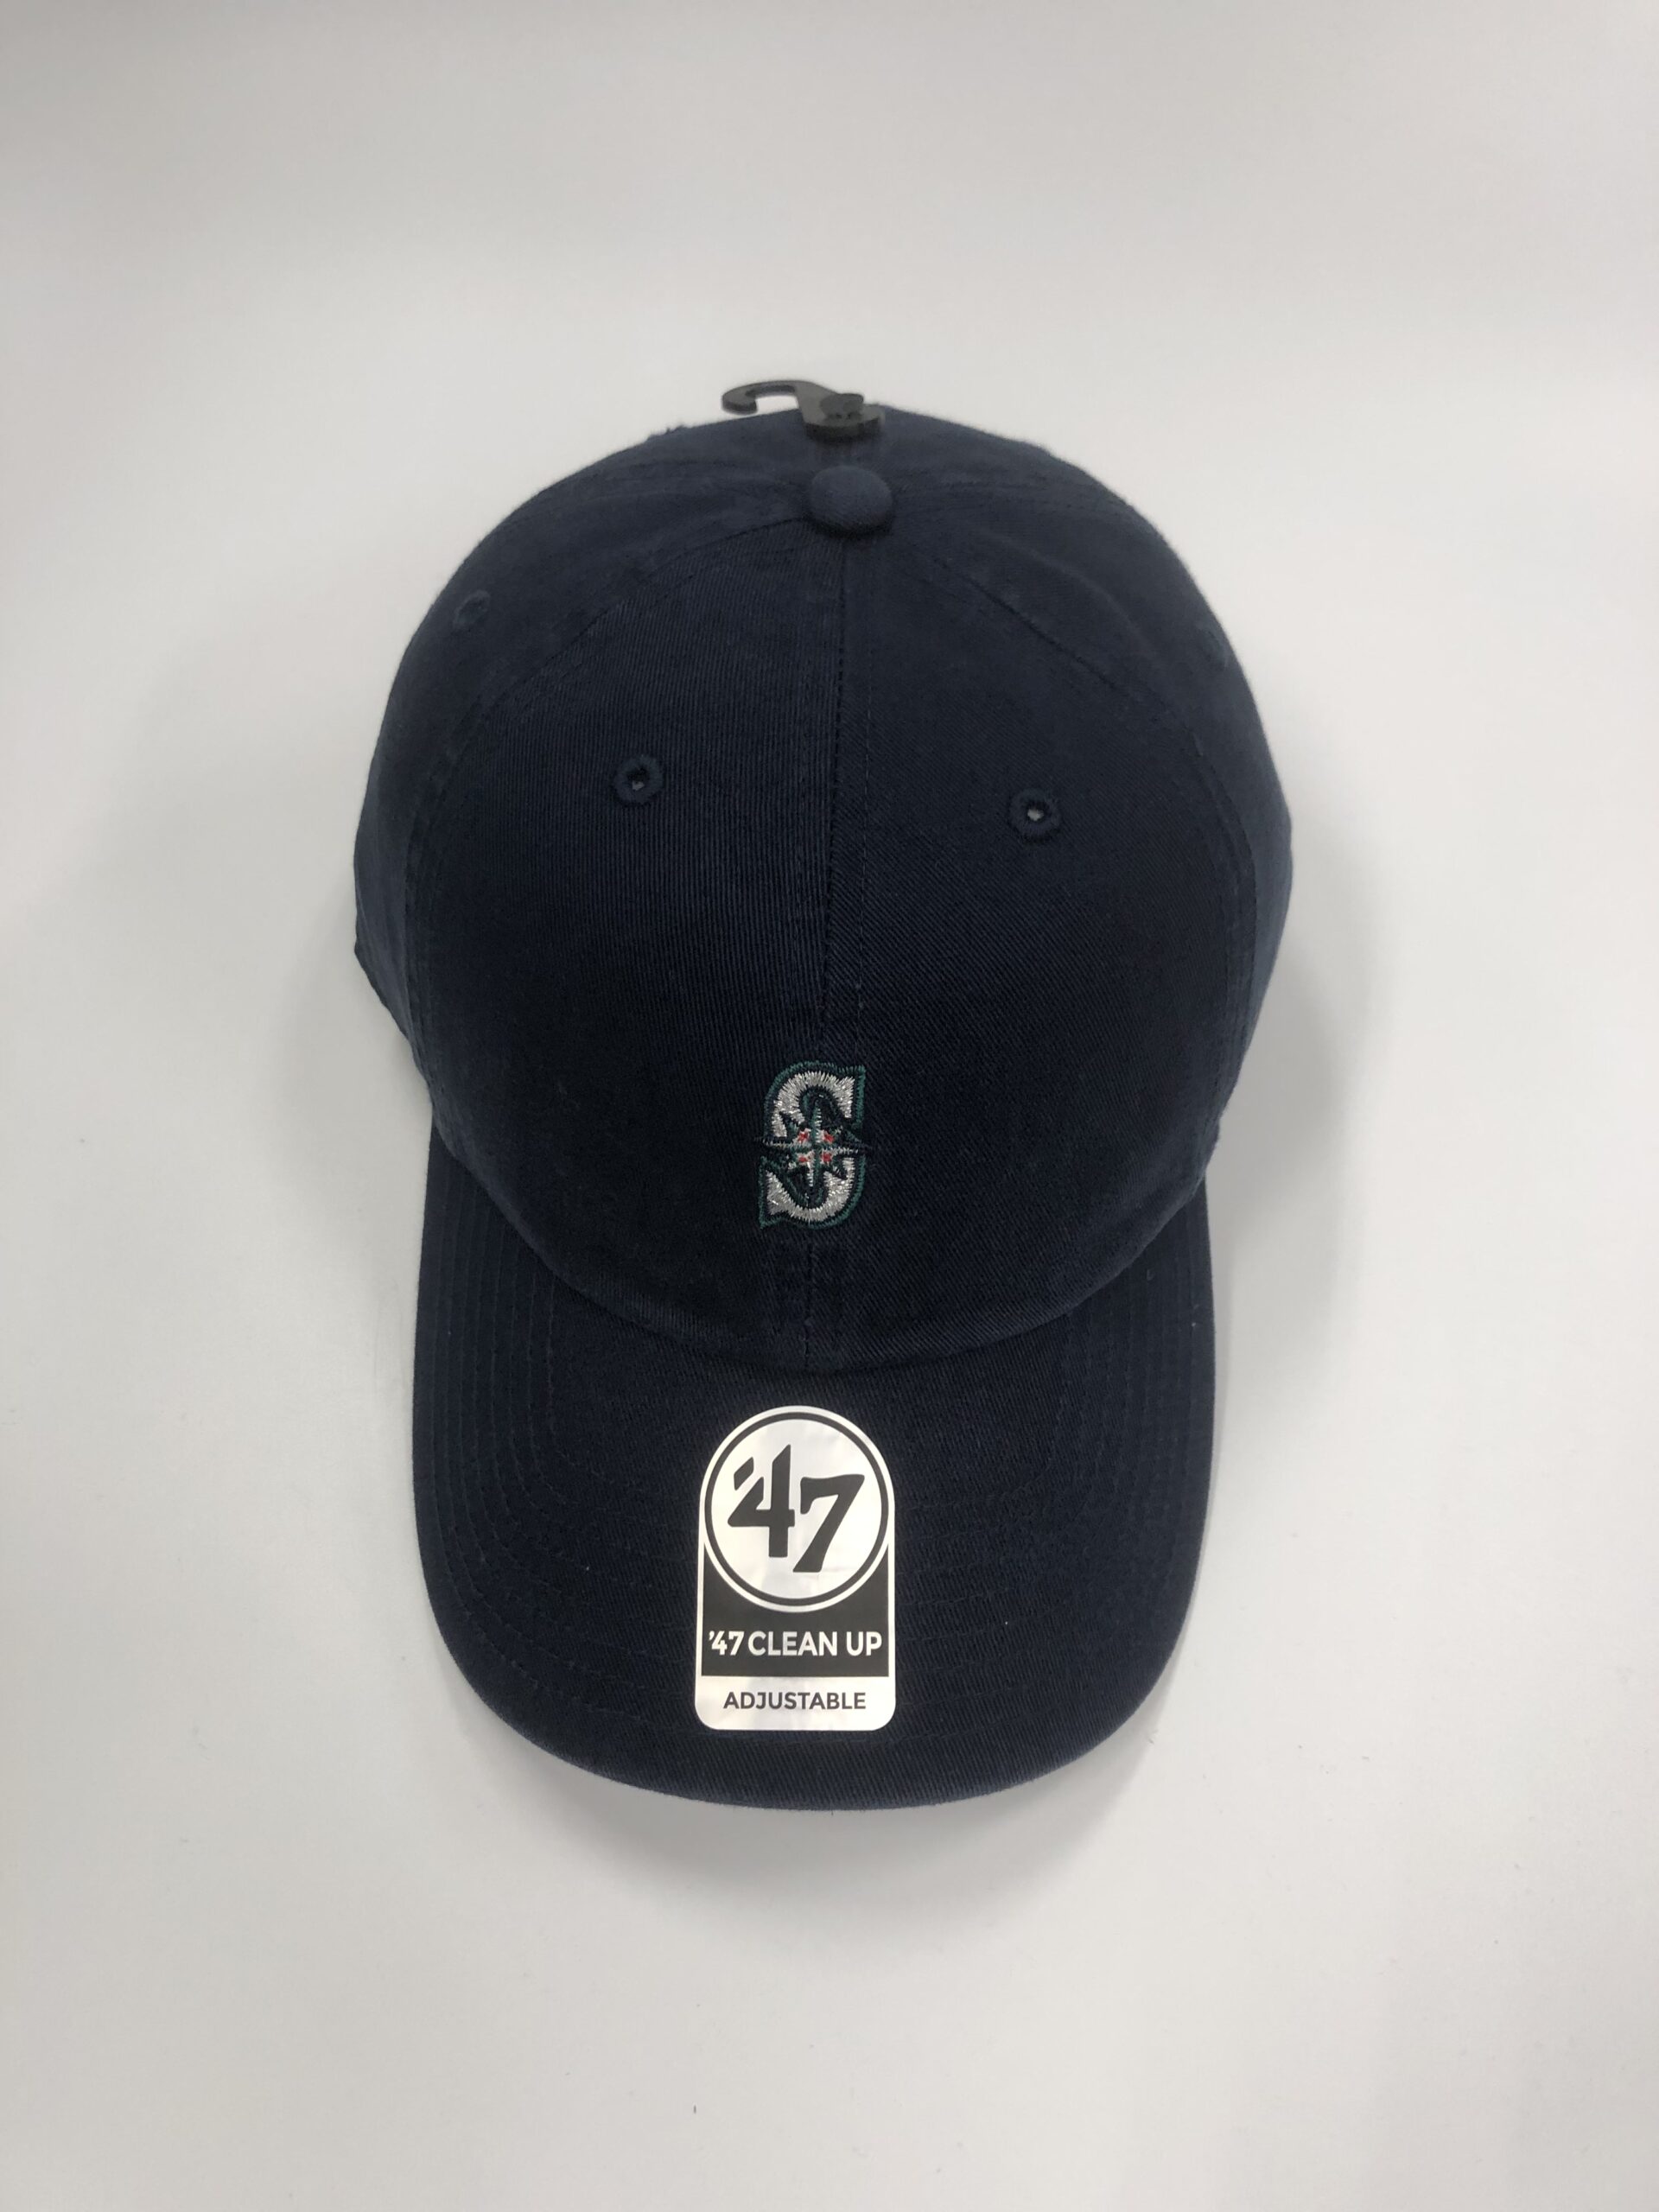 Mariners Base Runner’47 CLEAN UP Navy